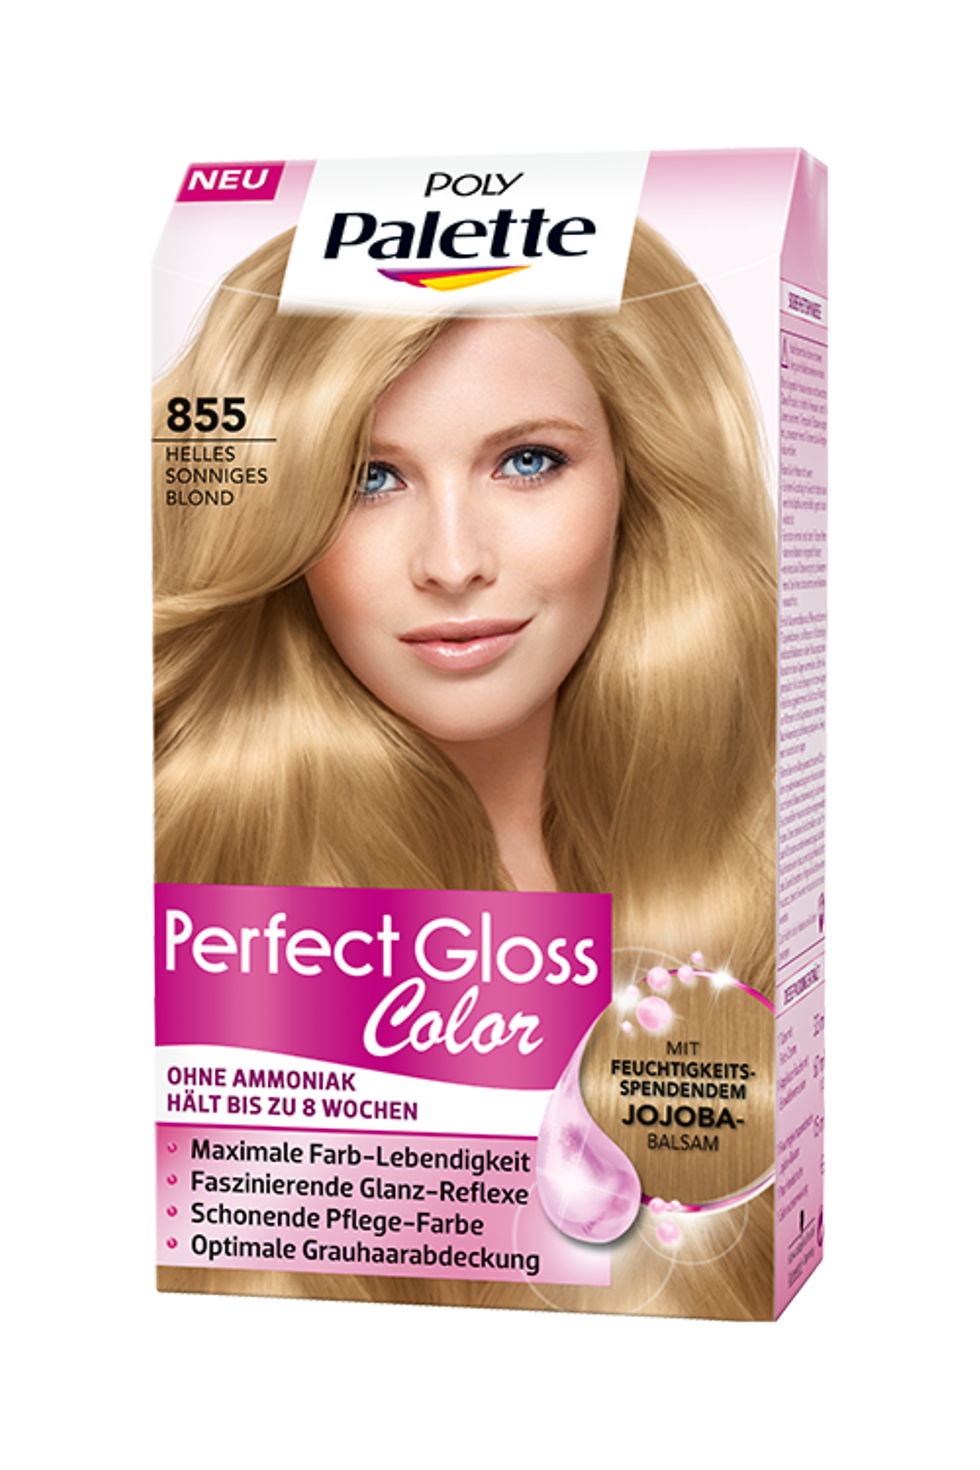 Poly Palette Perfect Gloss 855 Helles Sonniges Blond